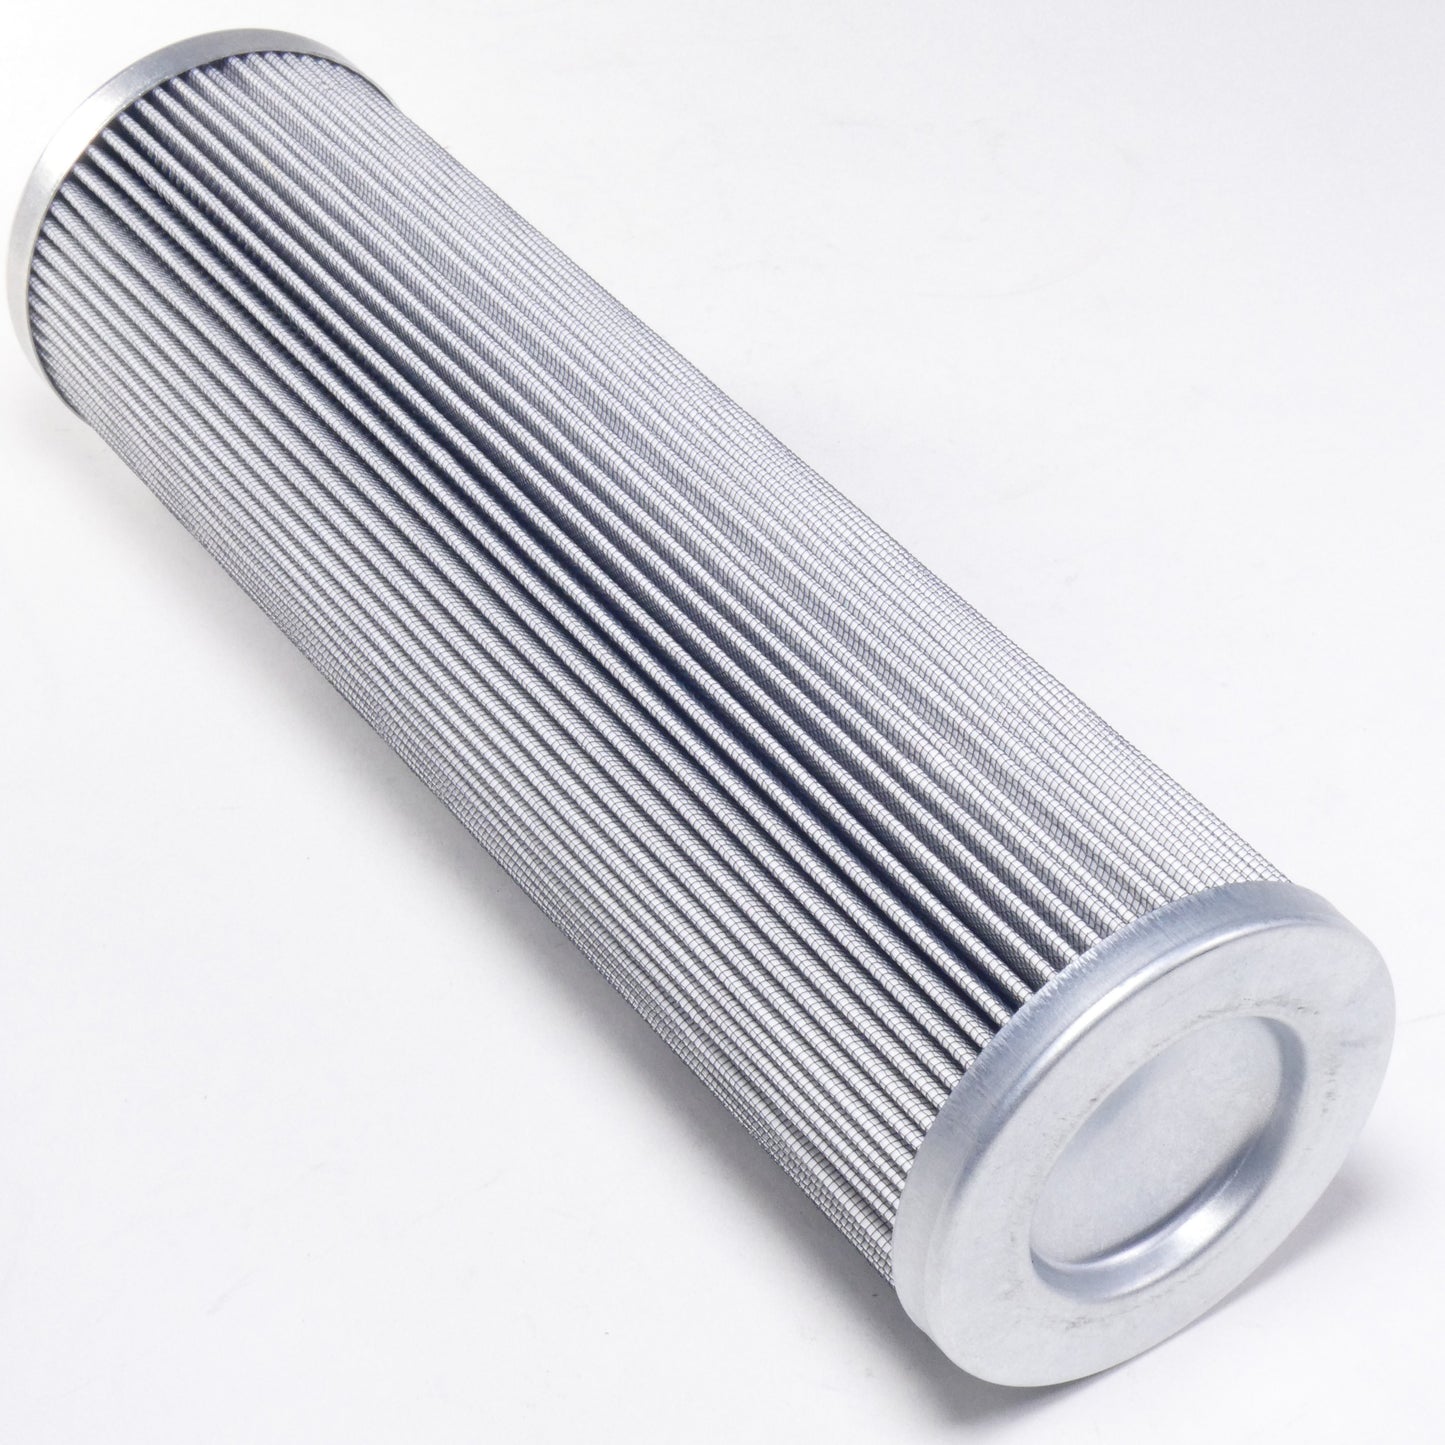 Hydrafil Replacement Filter Element for Filtersoft H8913MAAV